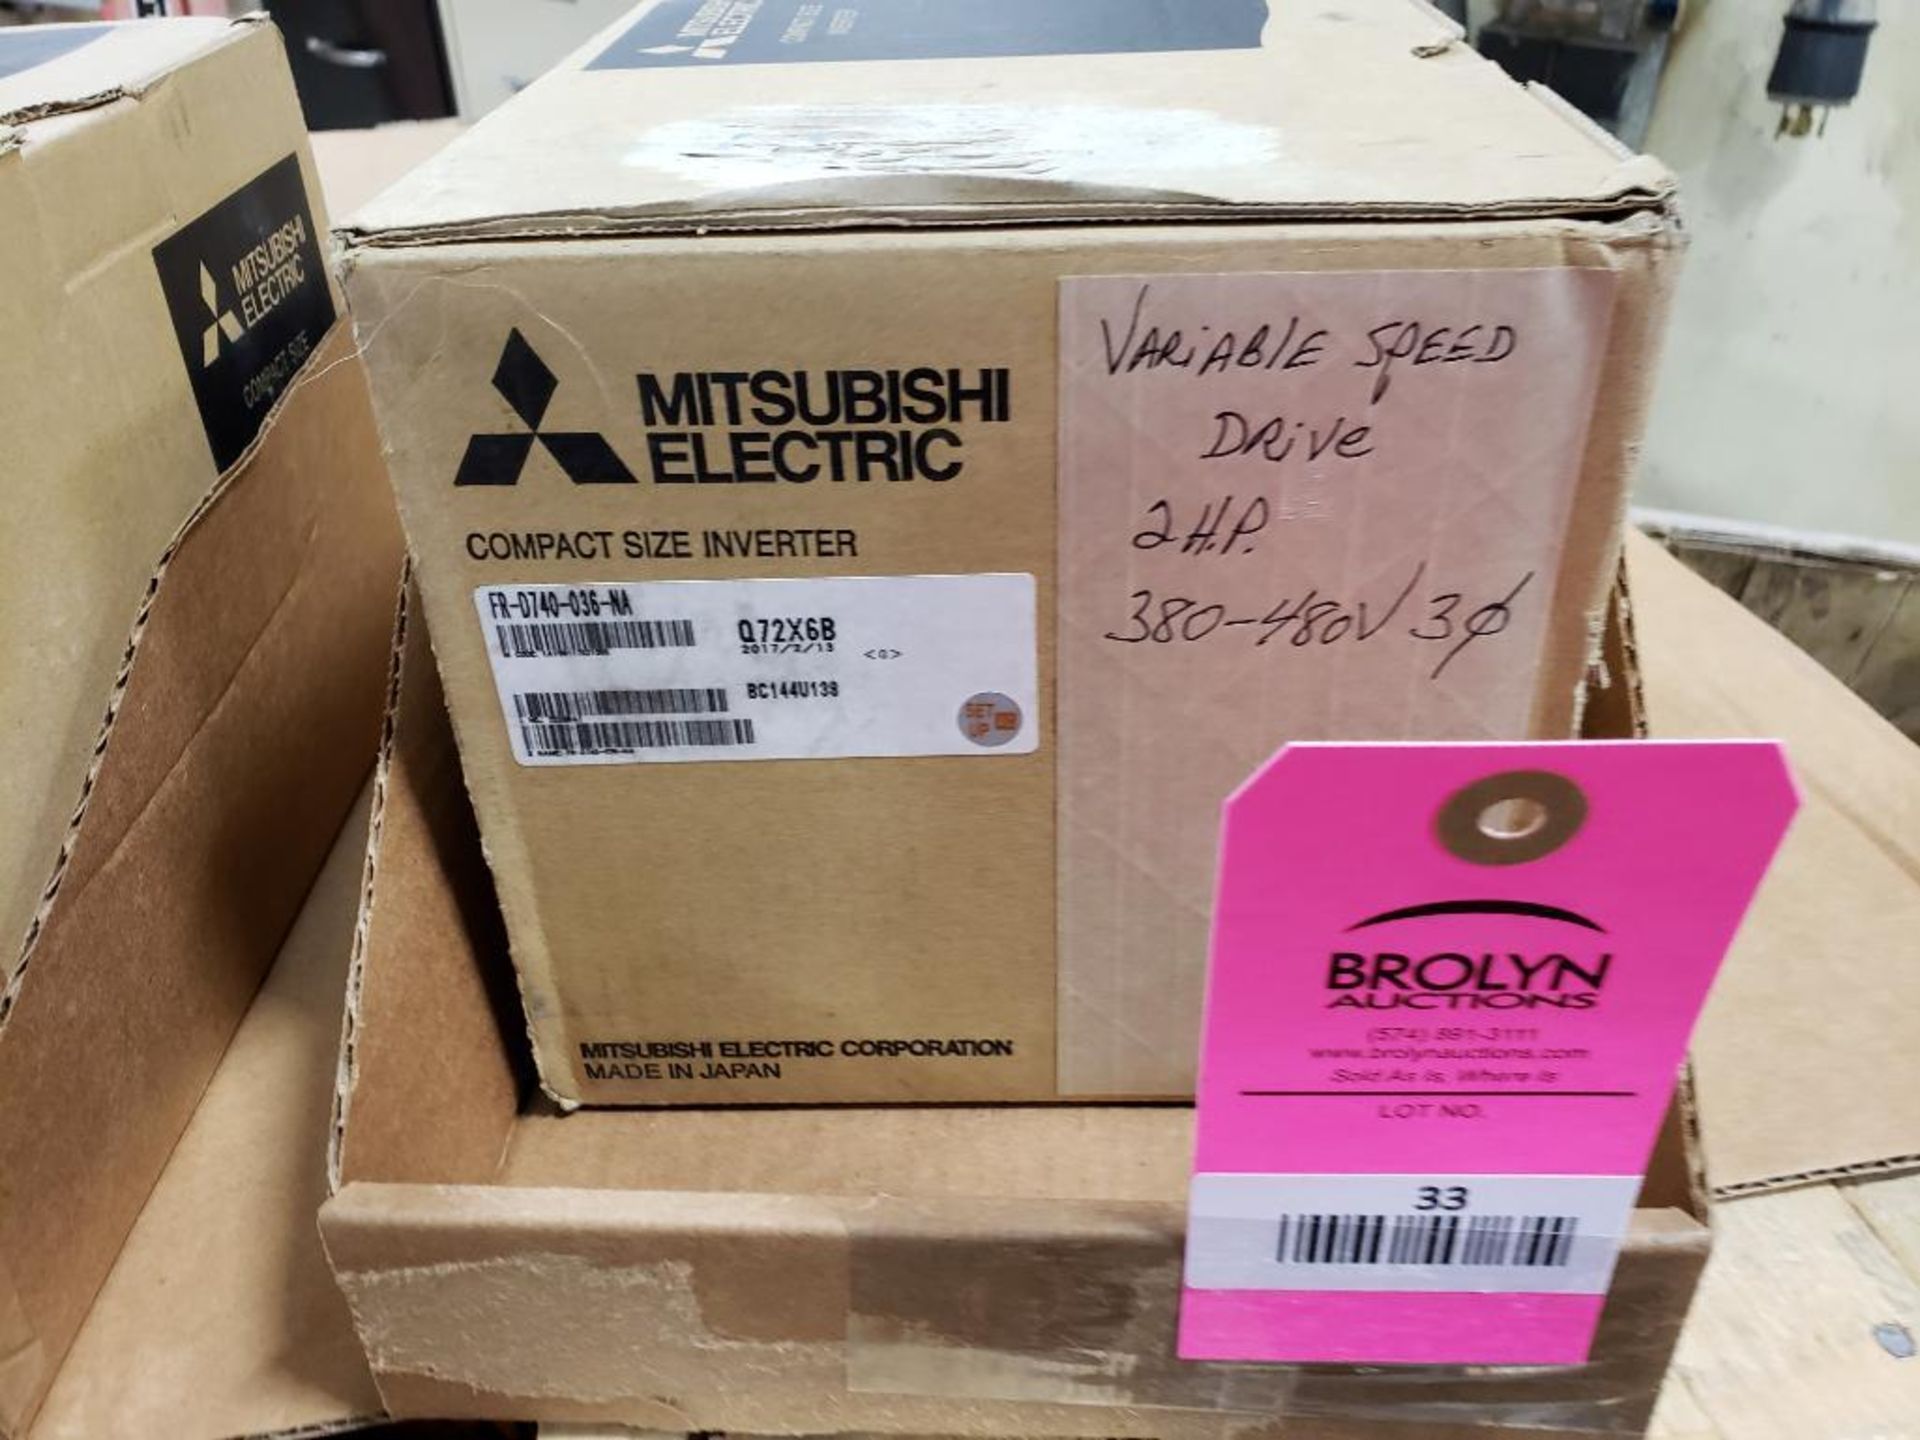 Mitsubishi Electric FR-D740-036-NA compact size inverter. New in box.